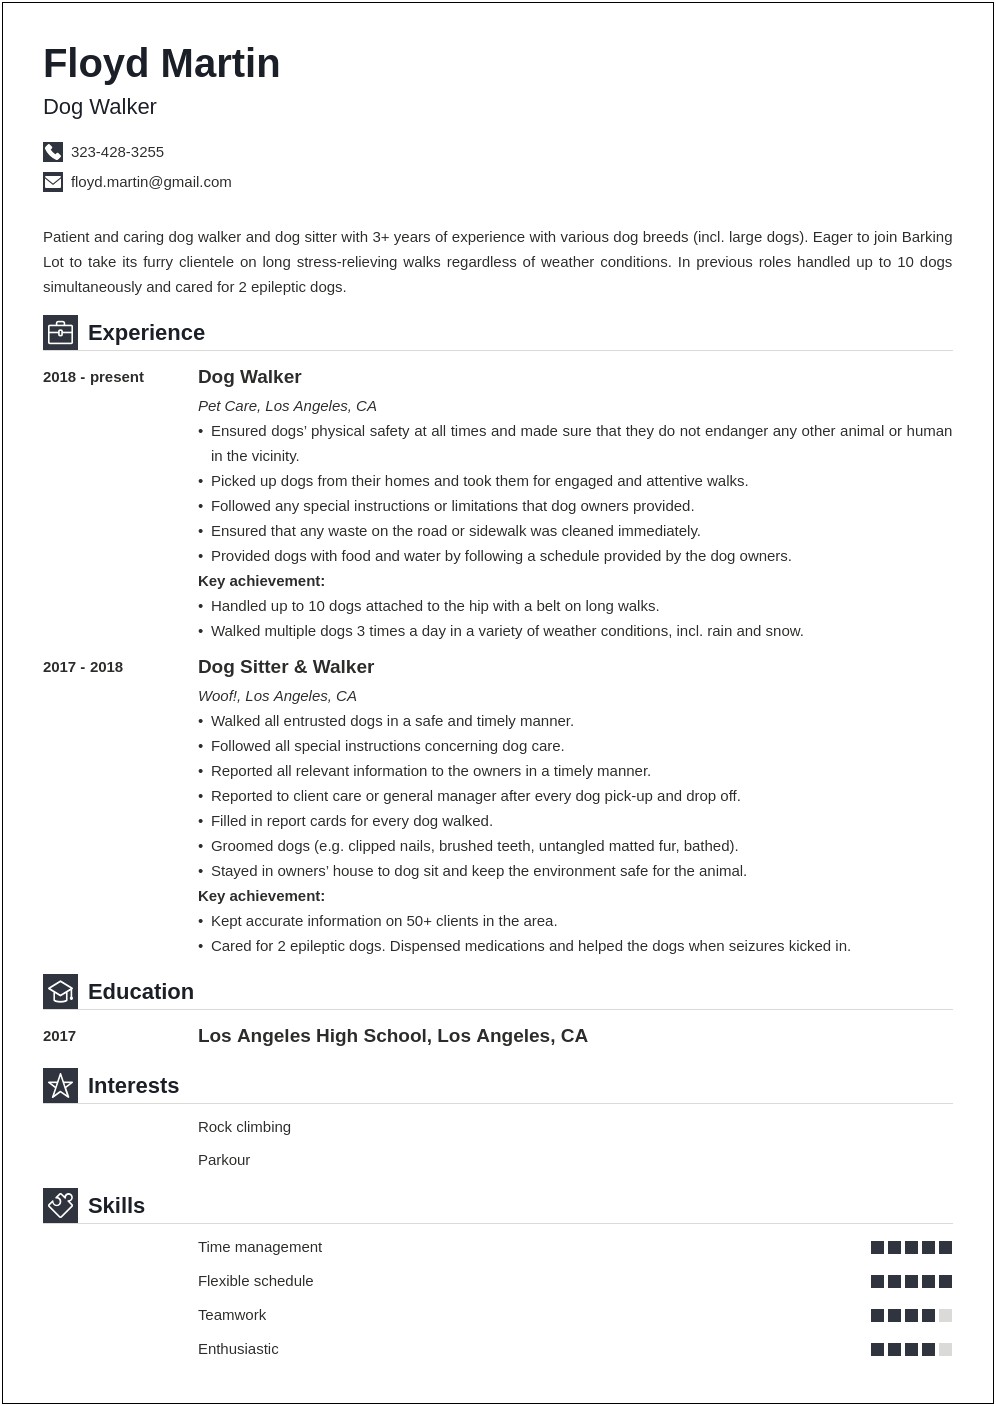 Resume For Teenager With Dog Sitting Experience